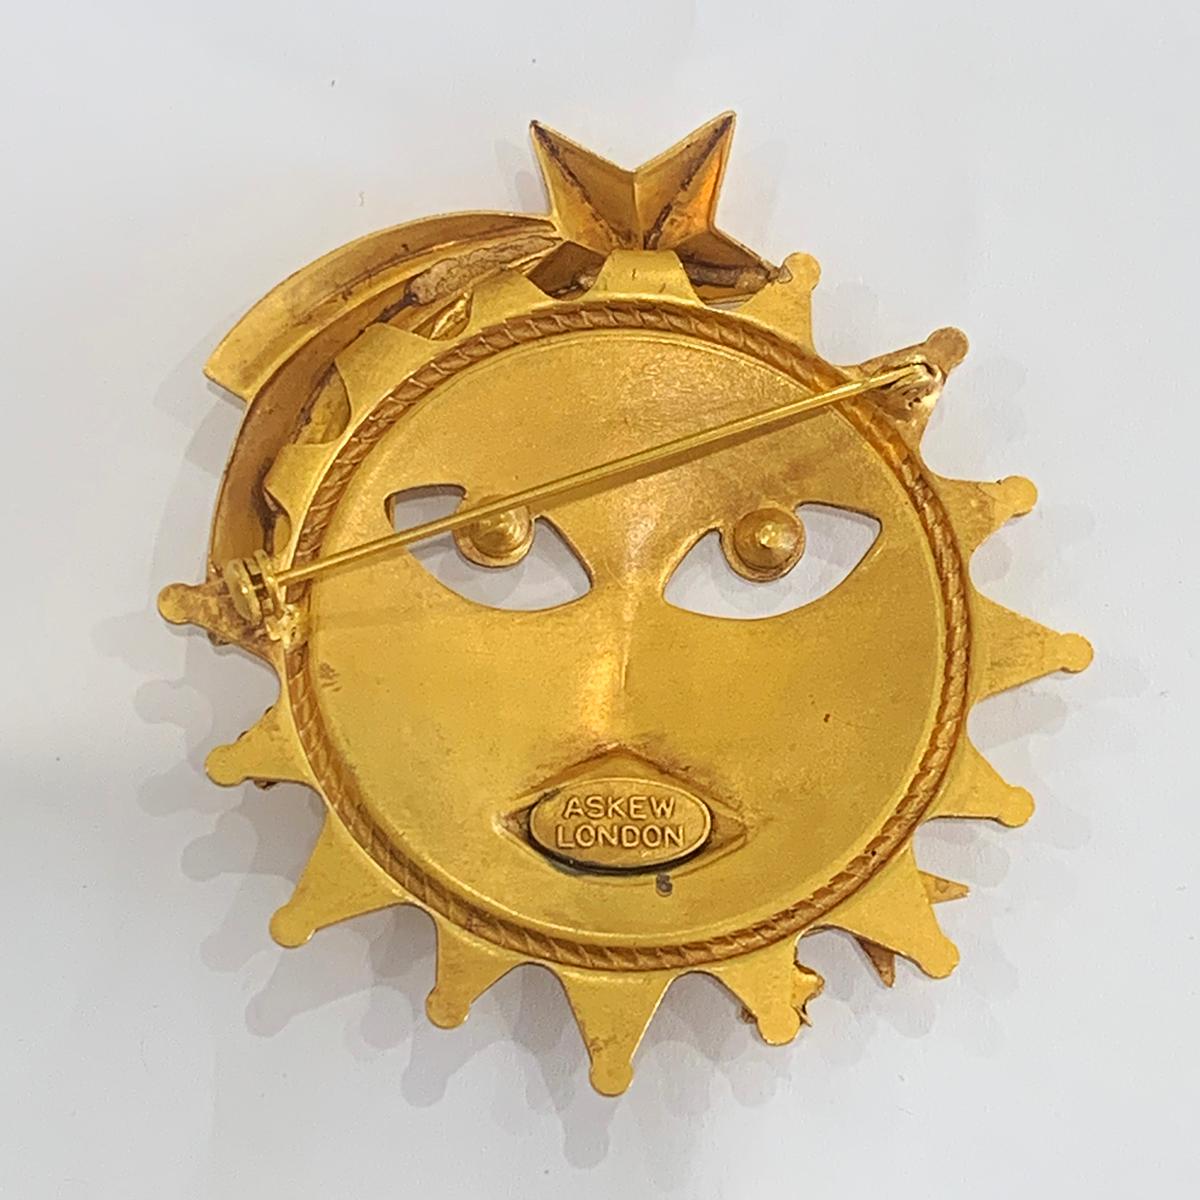 Large Sun Brooch or pin by “Askew of London” with “Sun Face” as the main design. With a “Shooting Star” and other stars highlighted with diamantes. Hallmarked to the rear, “ASKEW” over “ LONDON” within an ellipse surrounded.  All the metal has 24ct